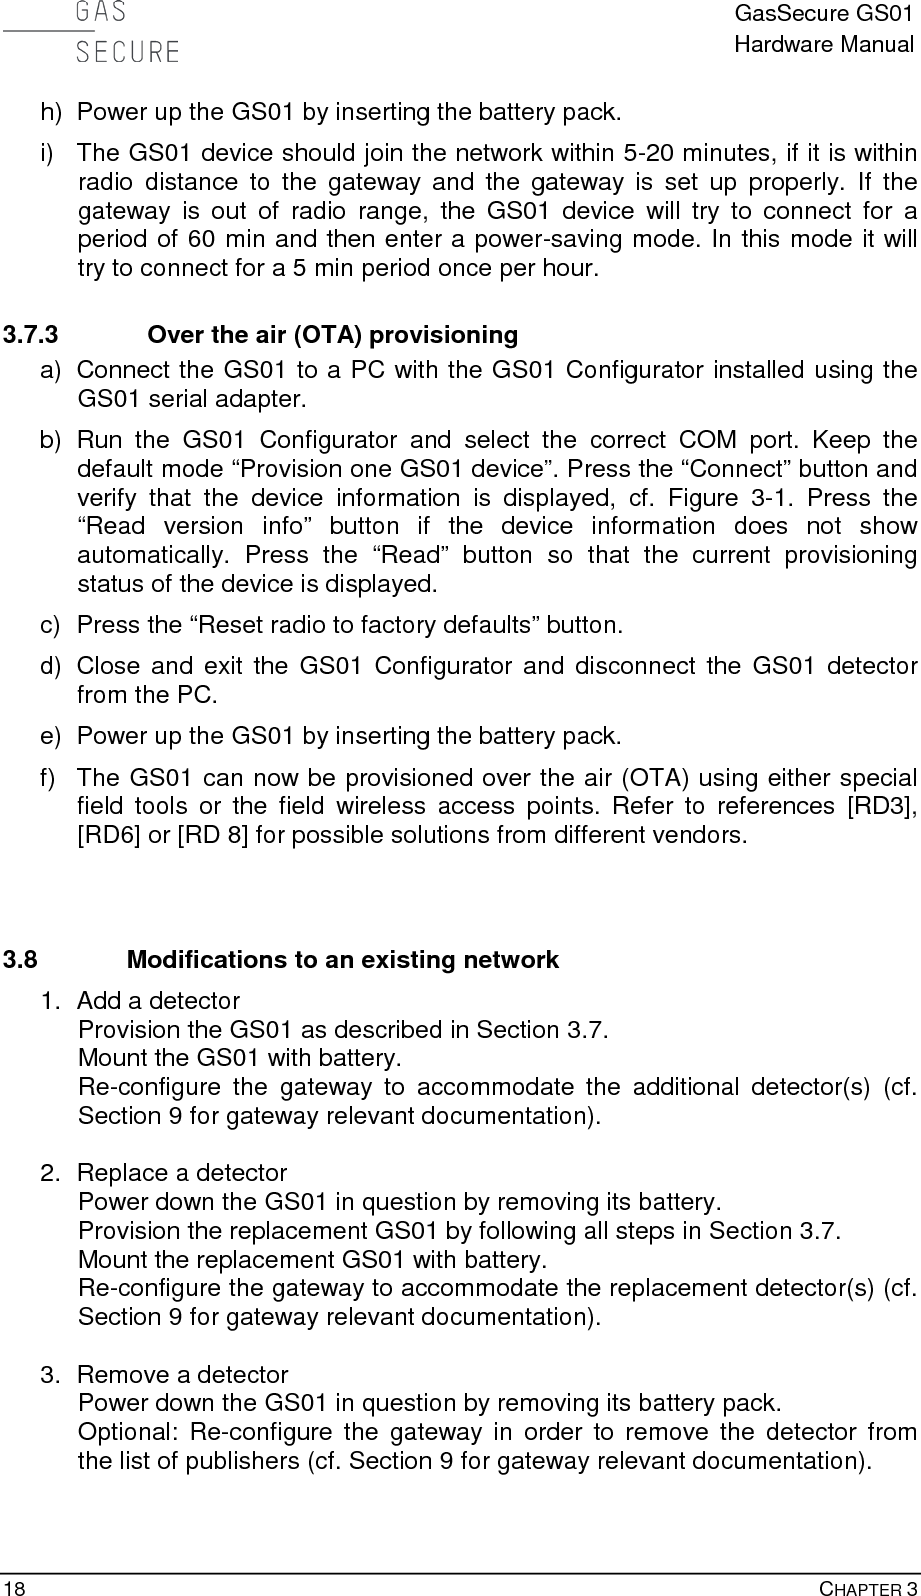  GasSecure GS01 Hardware Manual  18    CHAPTER 3 h) Power up the GS01 by inserting the battery pack. i) The GS01 device should join the network within 5-20 minutes, if it is within radio distance to the gateway and the gateway is set up properly. If the gateway is out of radio range, the GS01 device will try to connect for a period of 60 min and then enter a power-saving mode. In this mode it will try to connect for a 5 min period once per hour. 3.7.3 Over the air (OTA) provisioning a) Connect the GS01 to a PC with the GS01 Configurator installed using the GS01 serial adapter.   b) Run the GS01 Configurator and select the correct COM port. Keep the default mode “Provision one GS01 device”. Press the “Connect” button and verify that the device information is displayed, cf. Figure  3-1.  Press the “Read version info” button if the device information does not show automatically. Press the “Read” button so that the current provisioning status of the device is displayed. c)  Press the “Reset radio to factory defaults” button. d) Close and exit the GS01 Configurator and disconnect the GS01 detector from the PC. e) Power up the GS01 by inserting the battery pack. f) The GS01 can now be provisioned over the air (OTA) using either special field tools or the field wireless access points. Refer to references [RD3], [RD6] or [RD 8] for possible solutions from different vendors.   3.8 Modifications to an existing network 1. Add a detector Provision the GS01 as described in Section 3.7. Mount the GS01 with battery. Re-configure the gateway to accommodate the additional detector(s) (cf. Section 9 for gateway relevant documentation).  2. Replace a detector Power down the GS01 in question by removing its battery. Provision the replacement GS01 by following all steps in Section 3.7. Mount the replacement GS01 with battery. Re-configure the gateway to accommodate the replacement detector(s) (cf. Section 9 for gateway relevant documentation).  3. Remove a detector Power down the GS01 in question by removing its battery pack. Optional: Re-configure the gateway in order to remove the detector from the list of publishers (cf. Section 9 for gateway relevant documentation).  